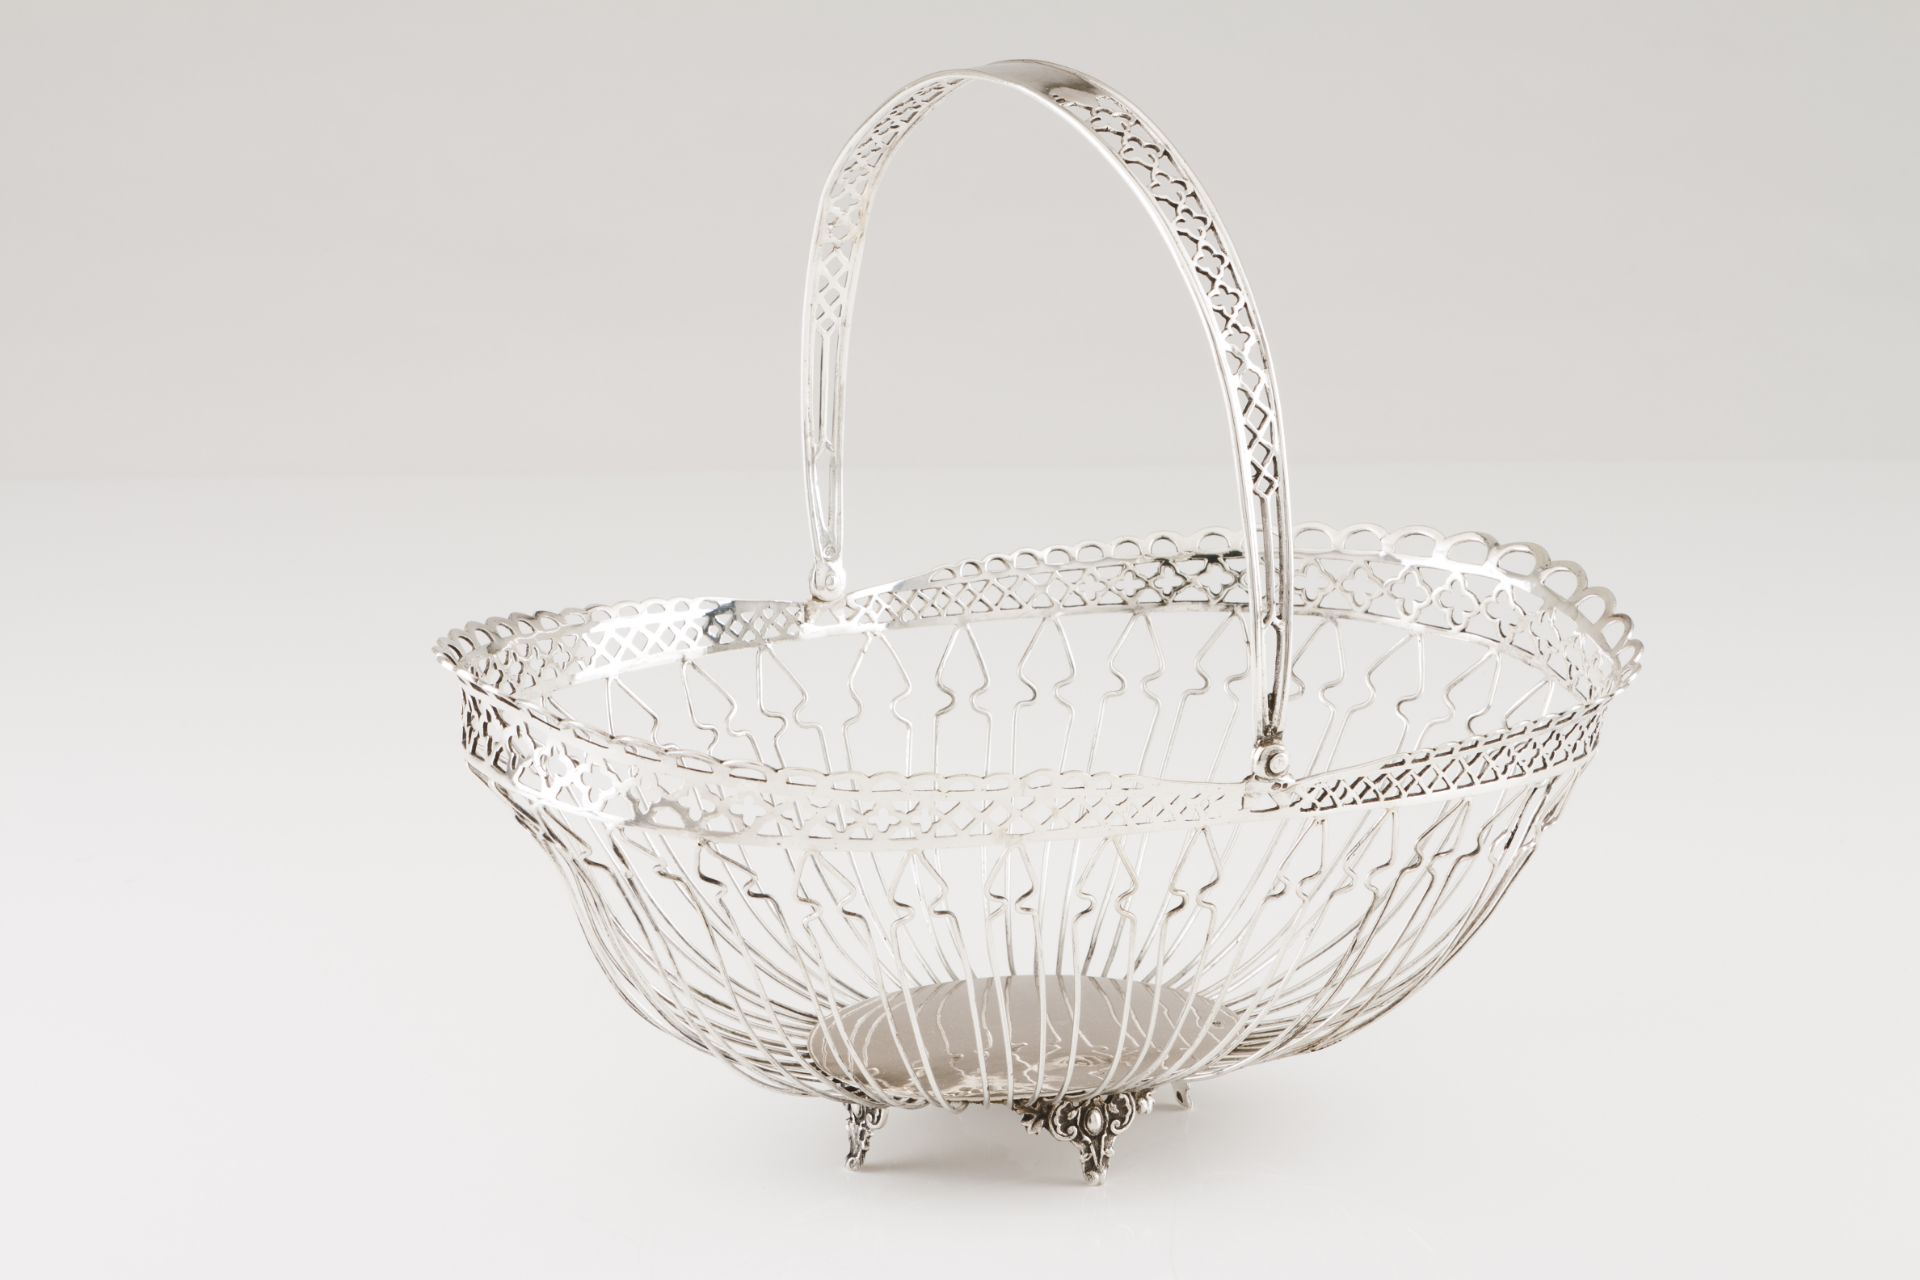 An articulated handle basketPortuguese silver Oval base, thread mesh basket and pierced gallery